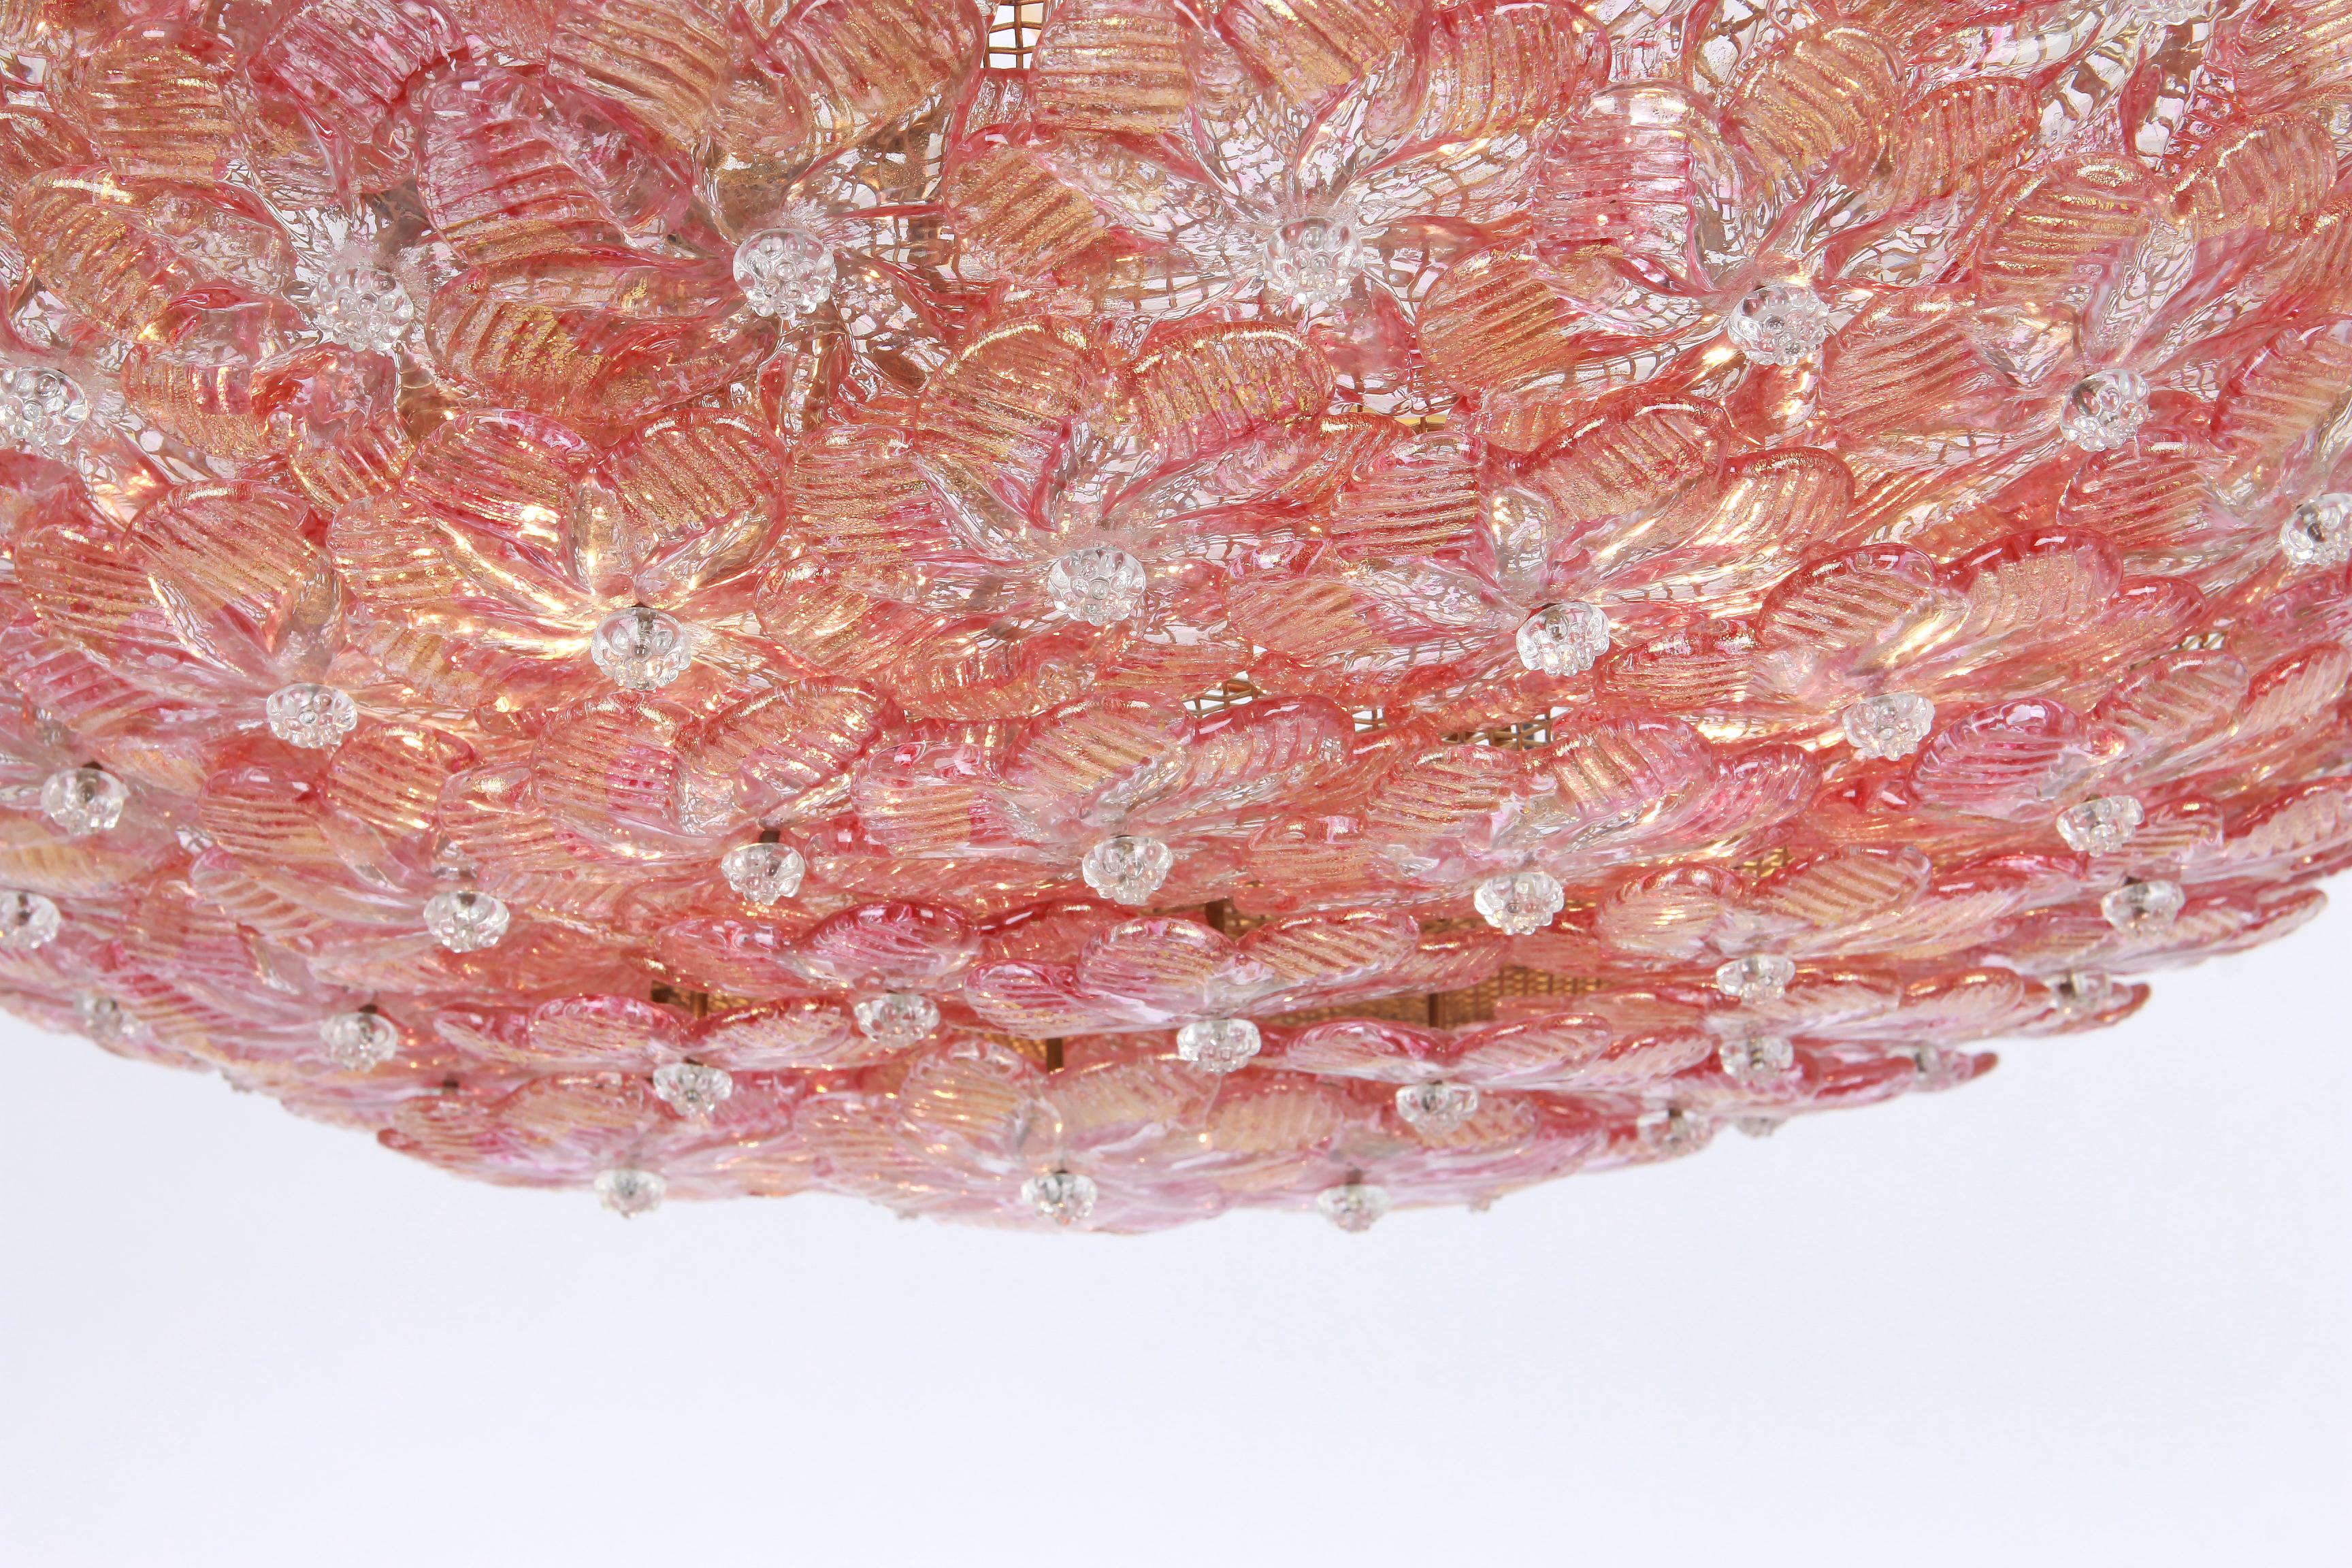 Mid-Century Modern 1 of 2 Midcentury Murano Glass Ceiling Fixture by Barovier & Toso, Italy, 1960s For Sale